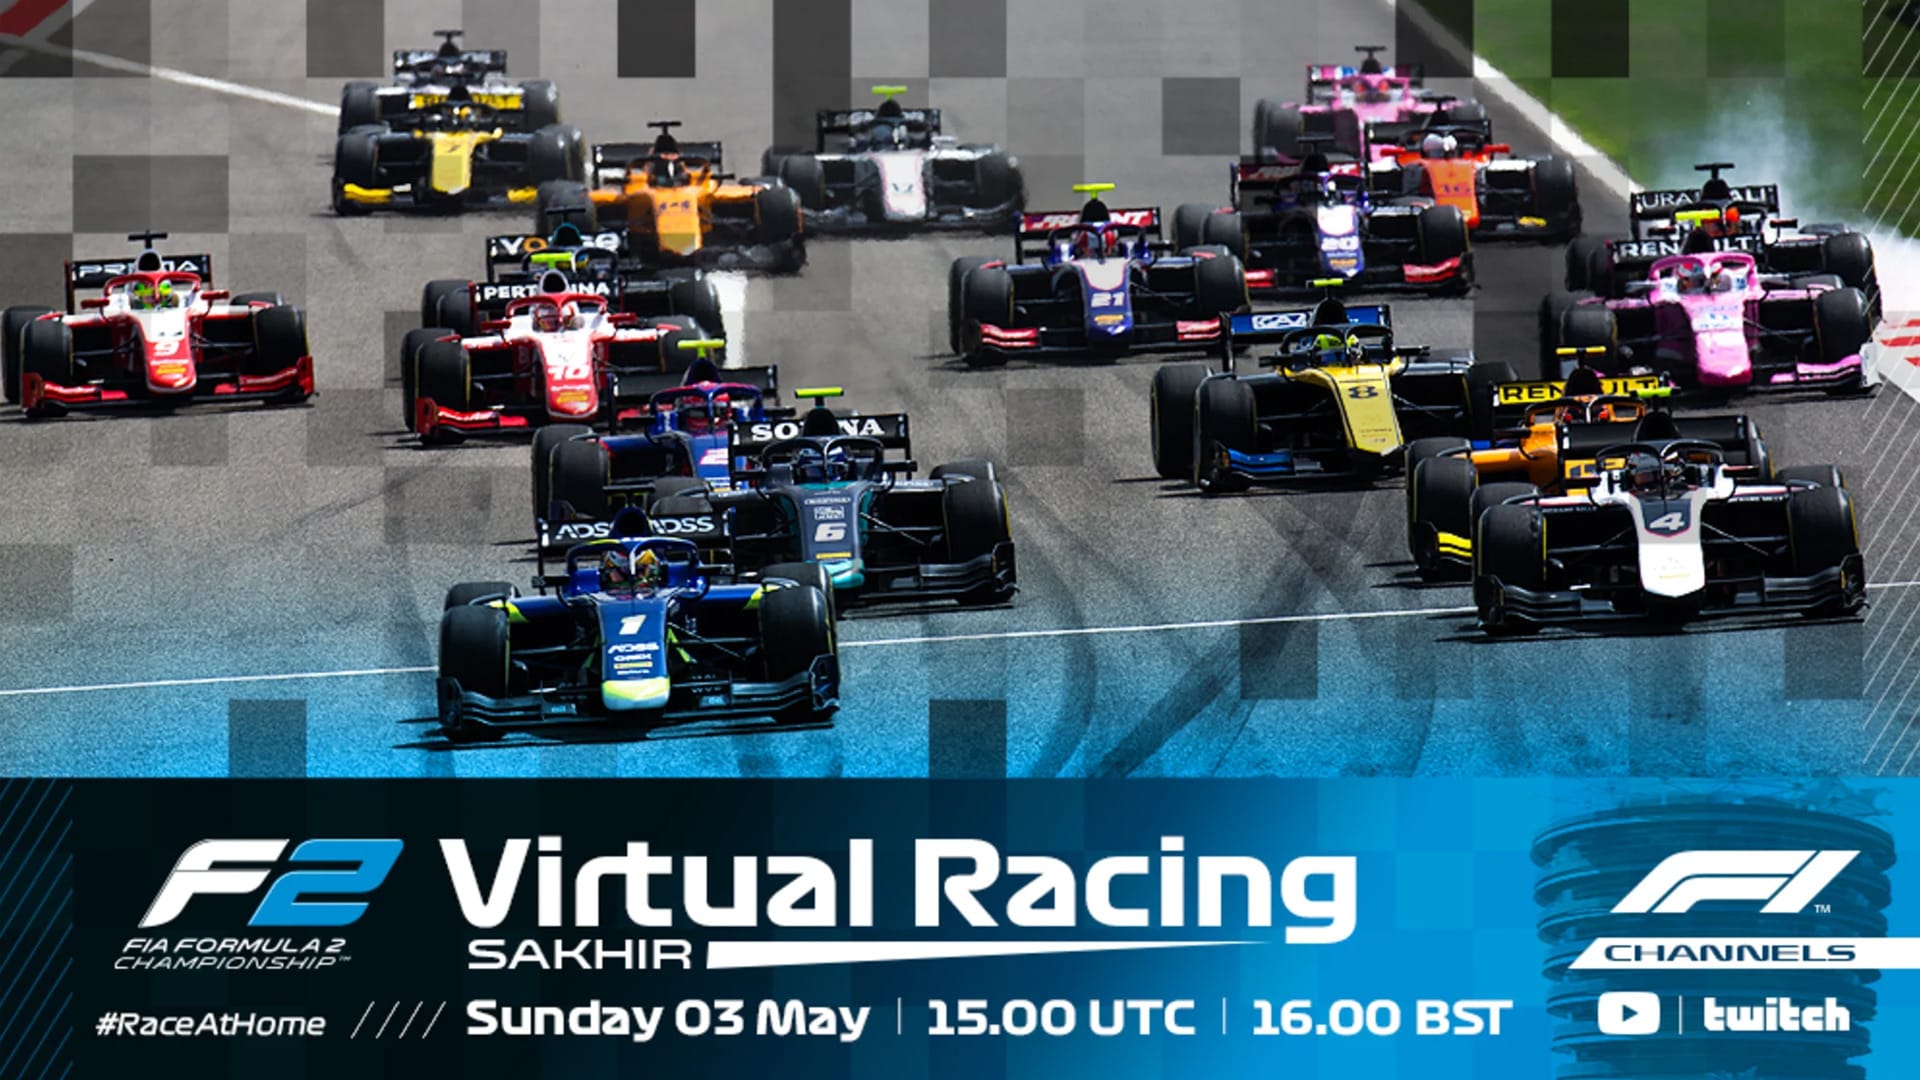 WATCH LIVE Join our stream of the opening round of F2/F3 Virtual Racing Formula 1®